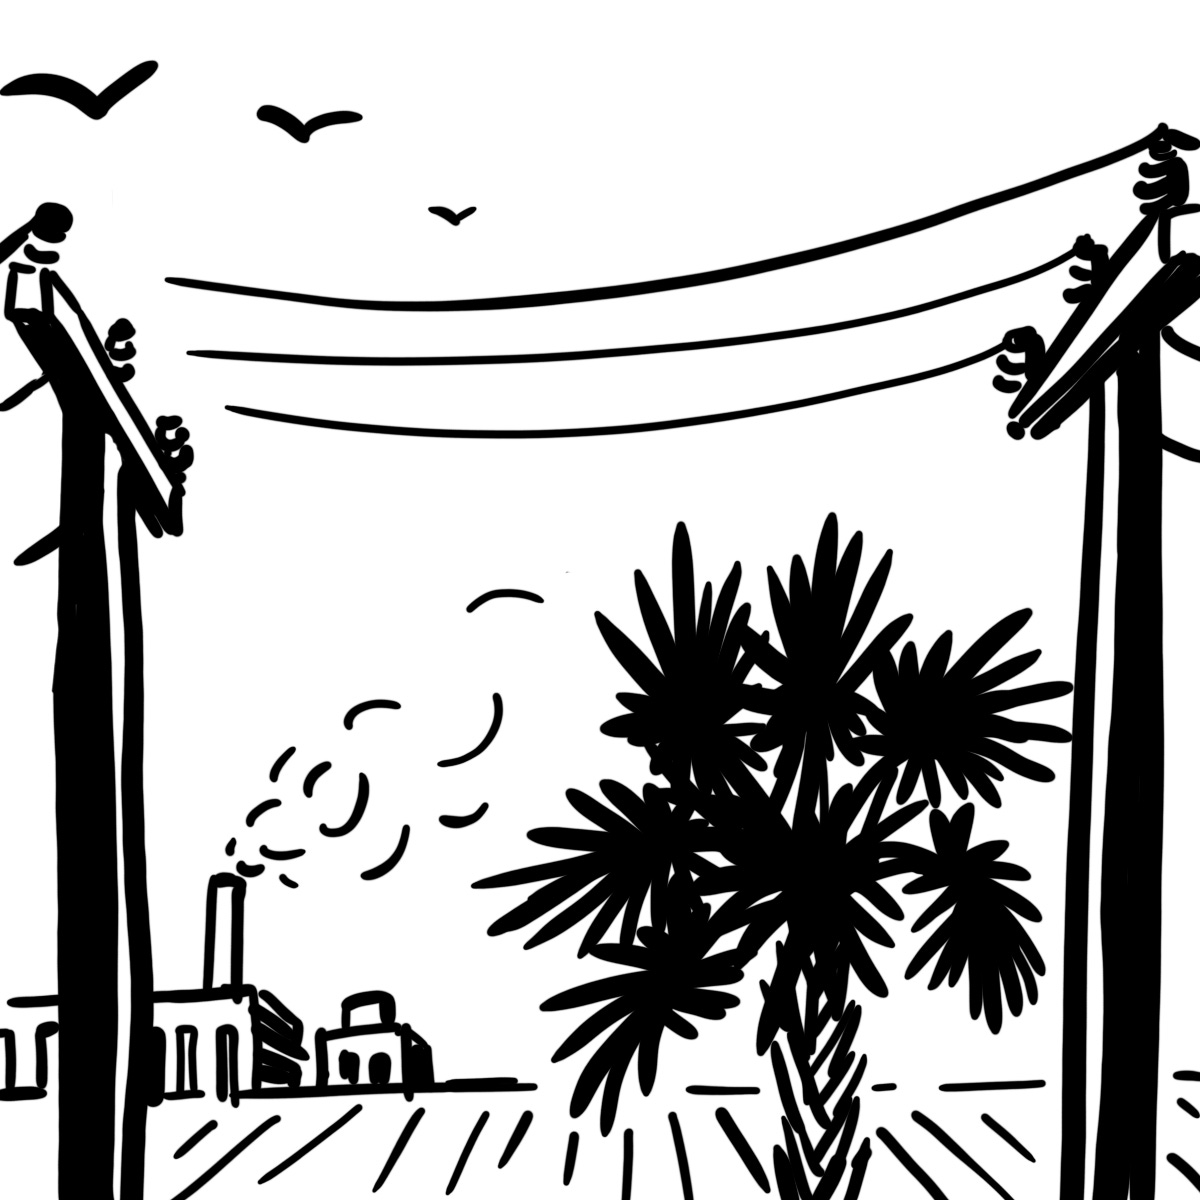 sketch of south Florida landscape with power lines, palm tree, sugarcane fields, and sugar refinery